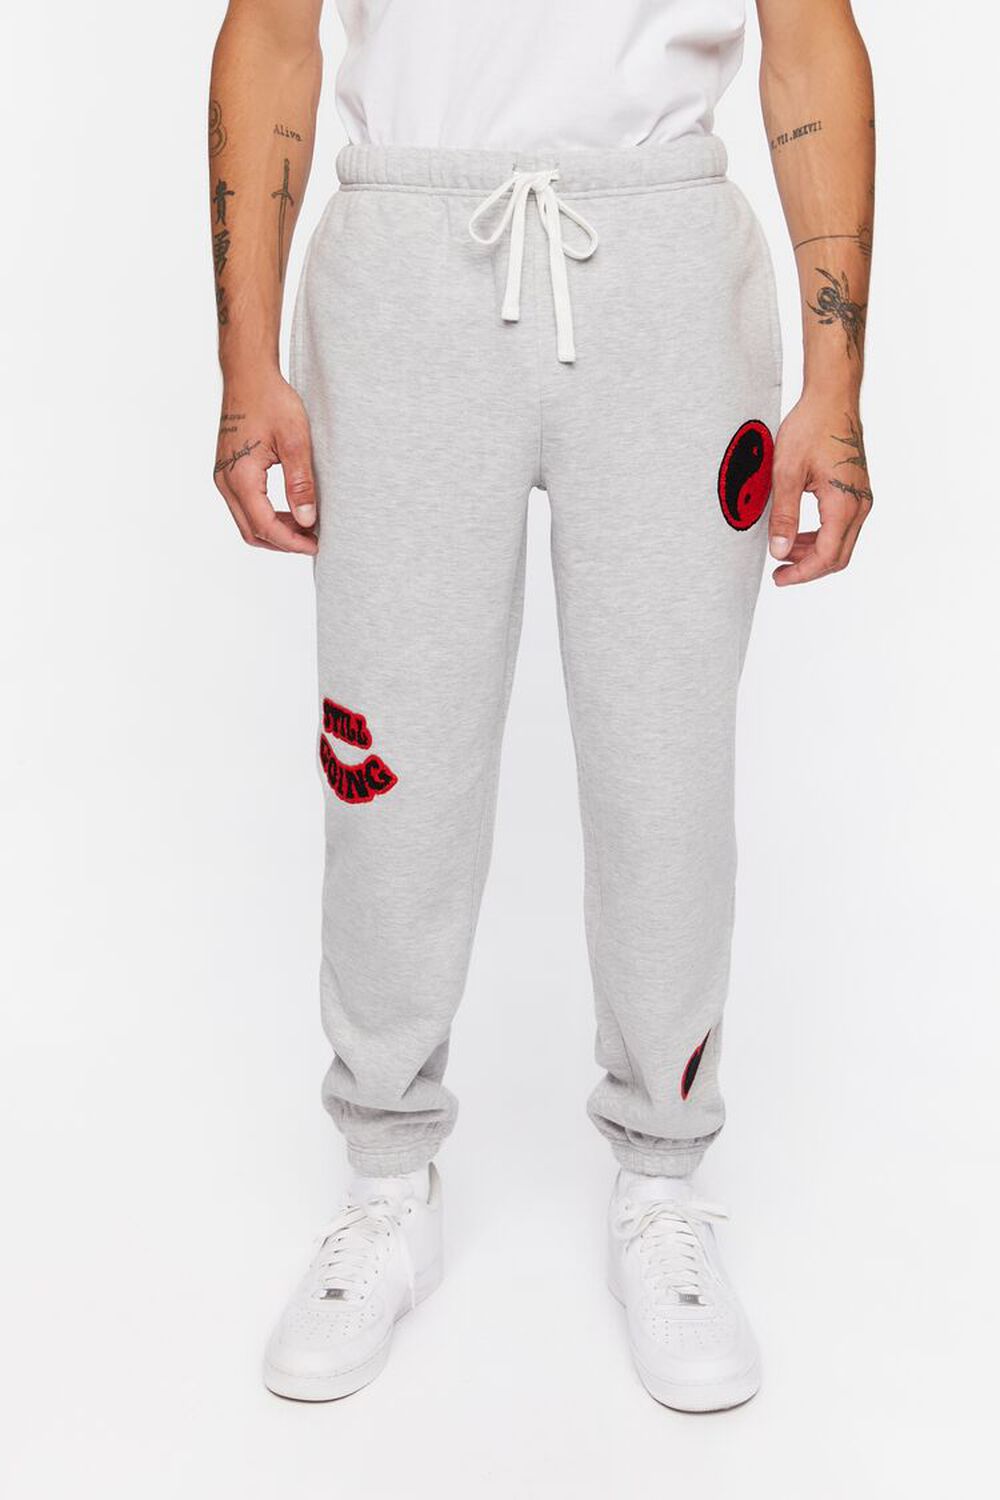 HEATHER GREY/MULTI Fleece Still Going Chenille Patch Joggers, image 2